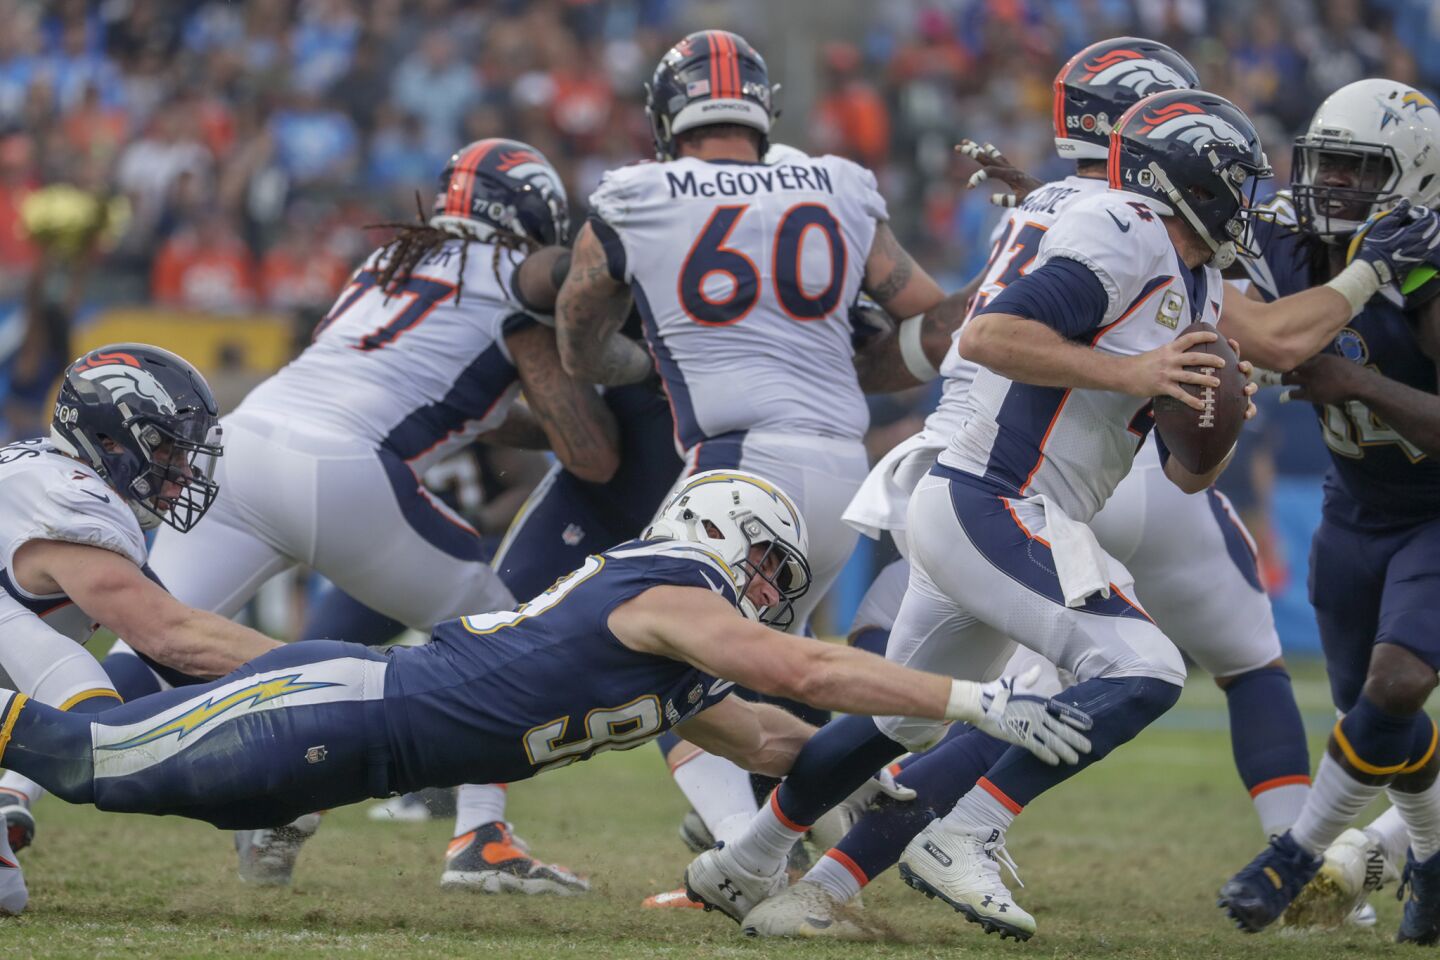 Chargers defensive lineman Joey Bosa dives at the feet of Denver Broncos quarterback Case Keenum during third quarter action at Stubhub Center on Sunday.